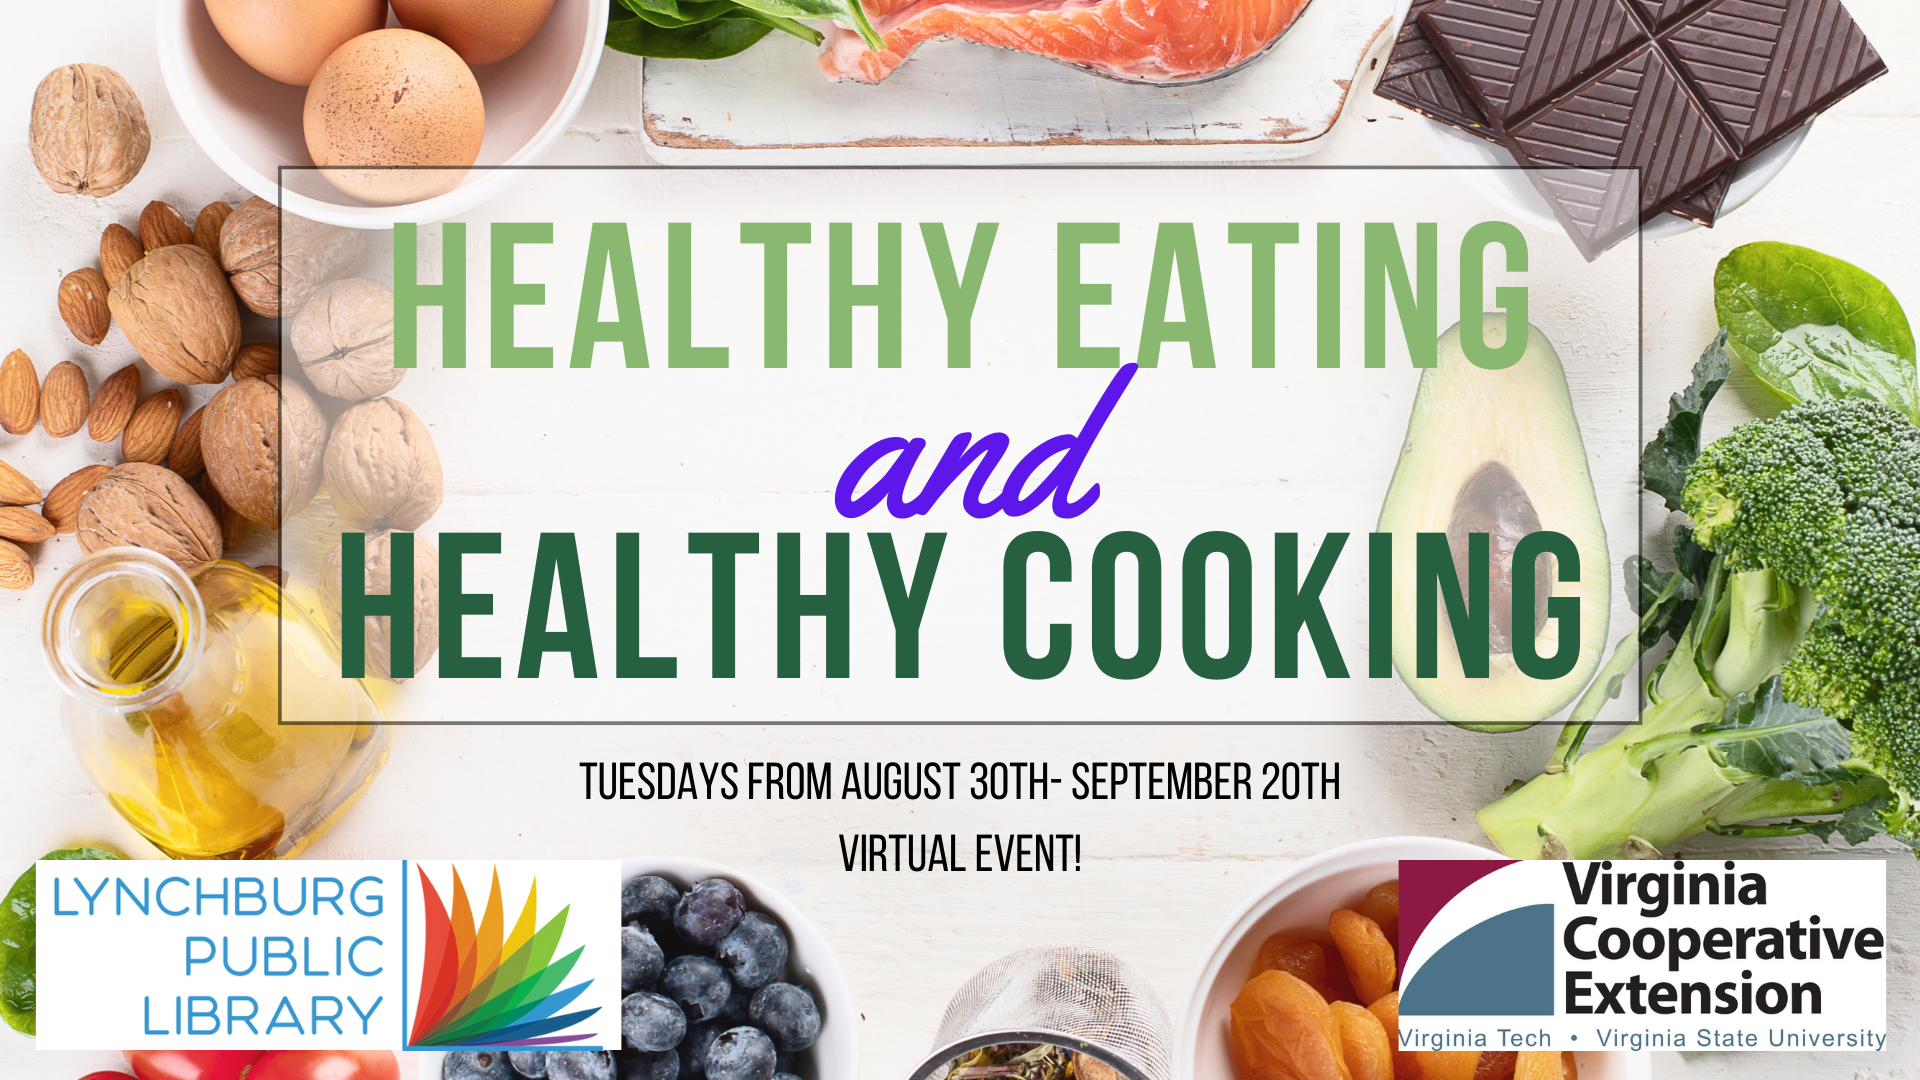 Healthy Eating and Healthy Cooking, Tuesdays from August 30th- September 20th, Virtual Event!